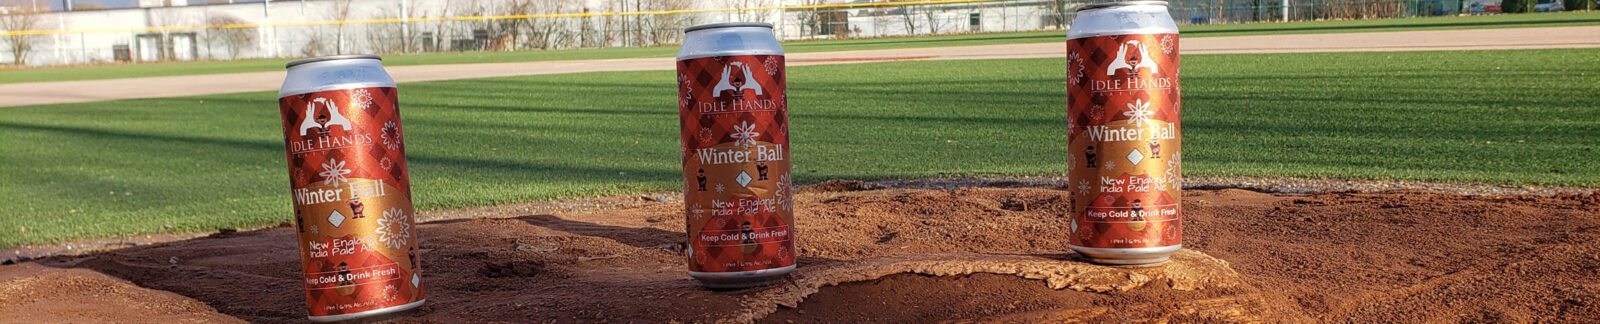 Winter Ball IPA by Idle Hands Brewery